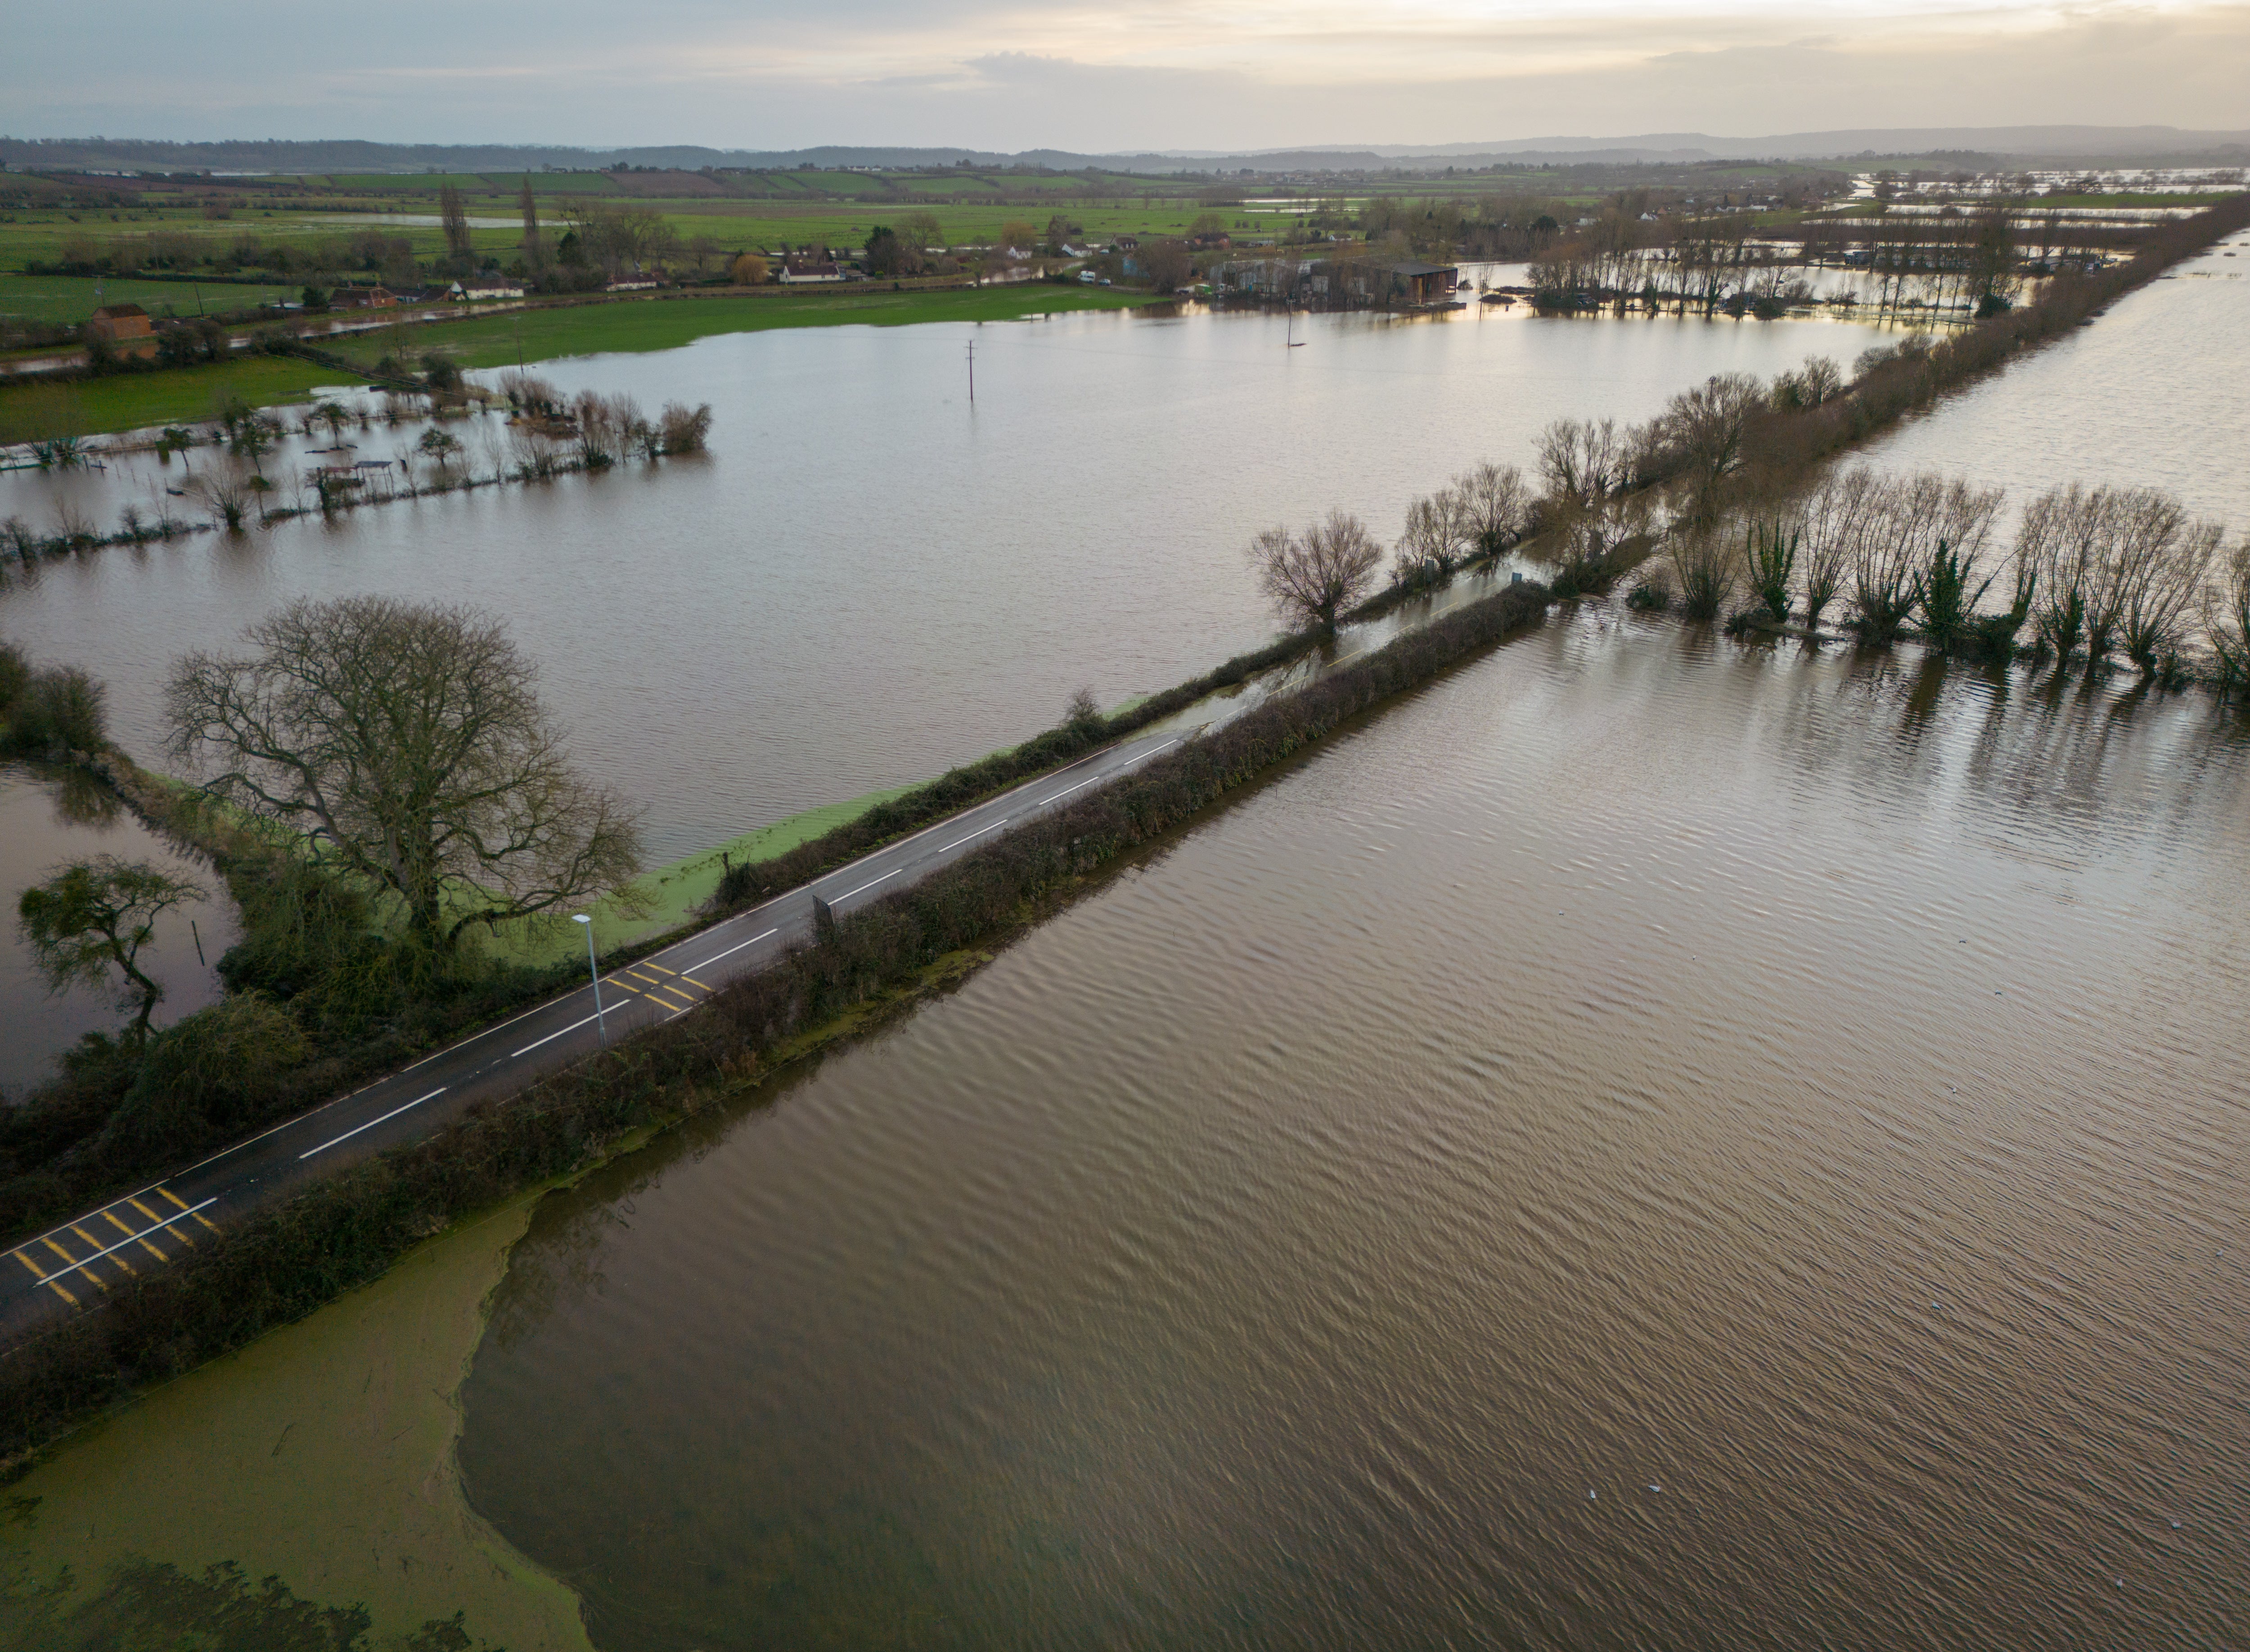 Flood water surrounds the A361 road in Burrowbridge due to widespread flooding of the Somerset Levels